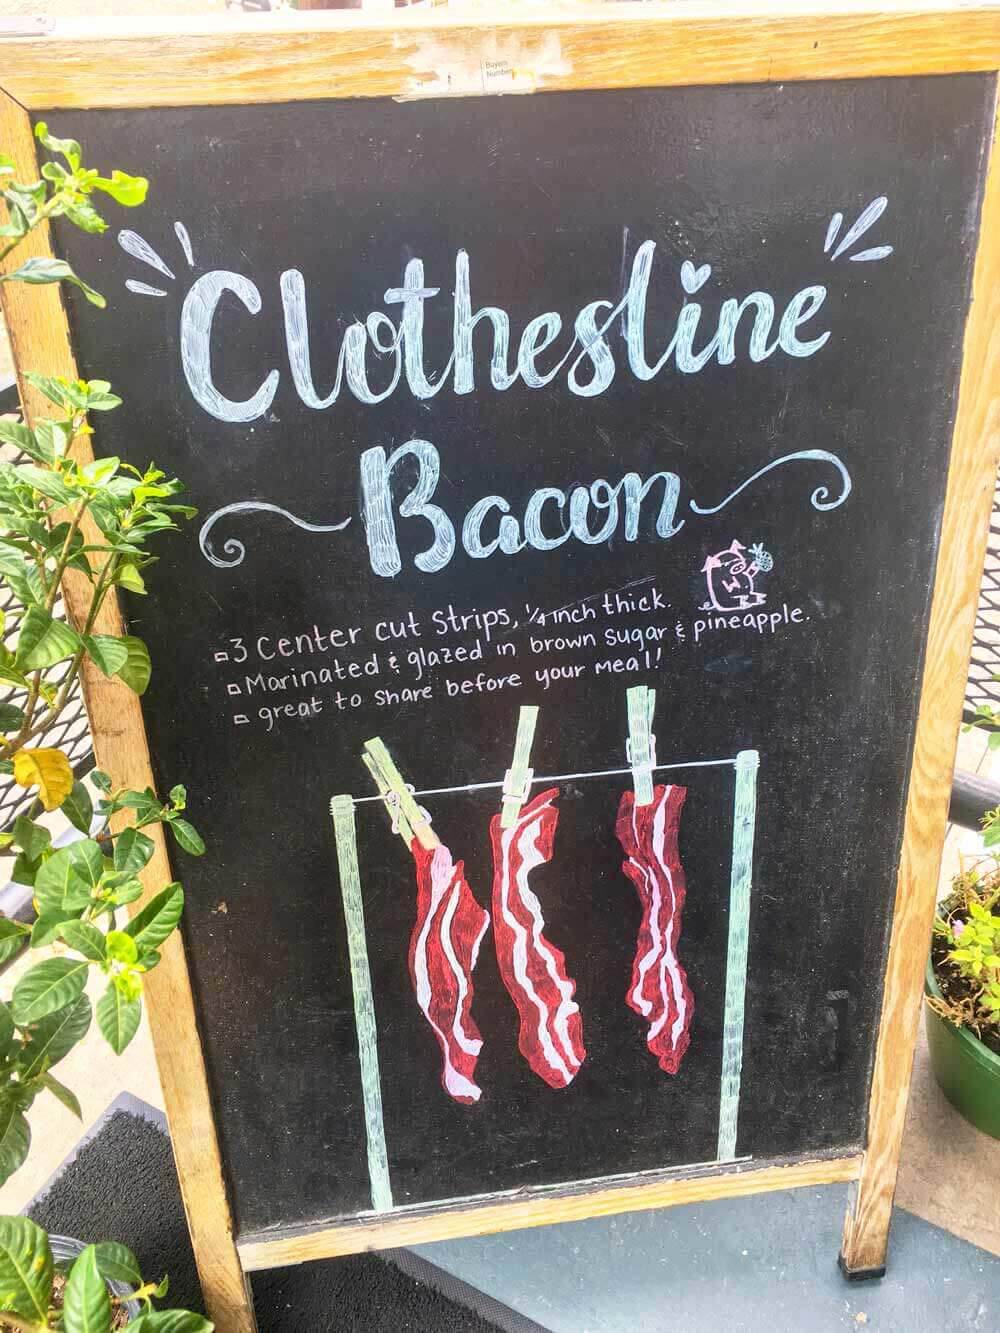 sign at 2 Cracked Eggs in downtown Savannah advertising "clothesline bacon"